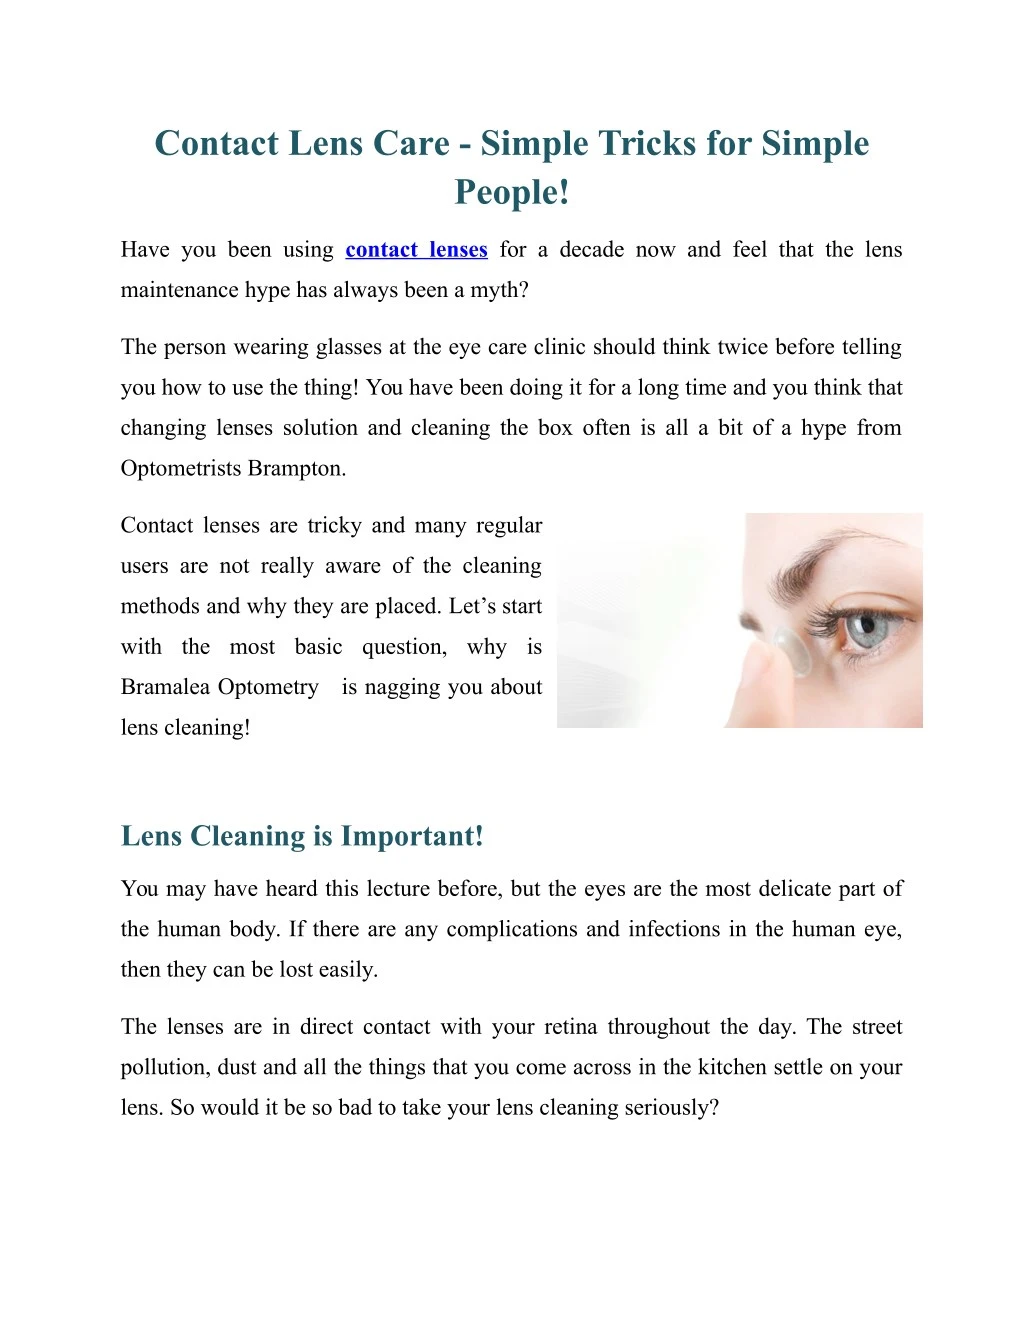 contact lens care simple tricks for simple people